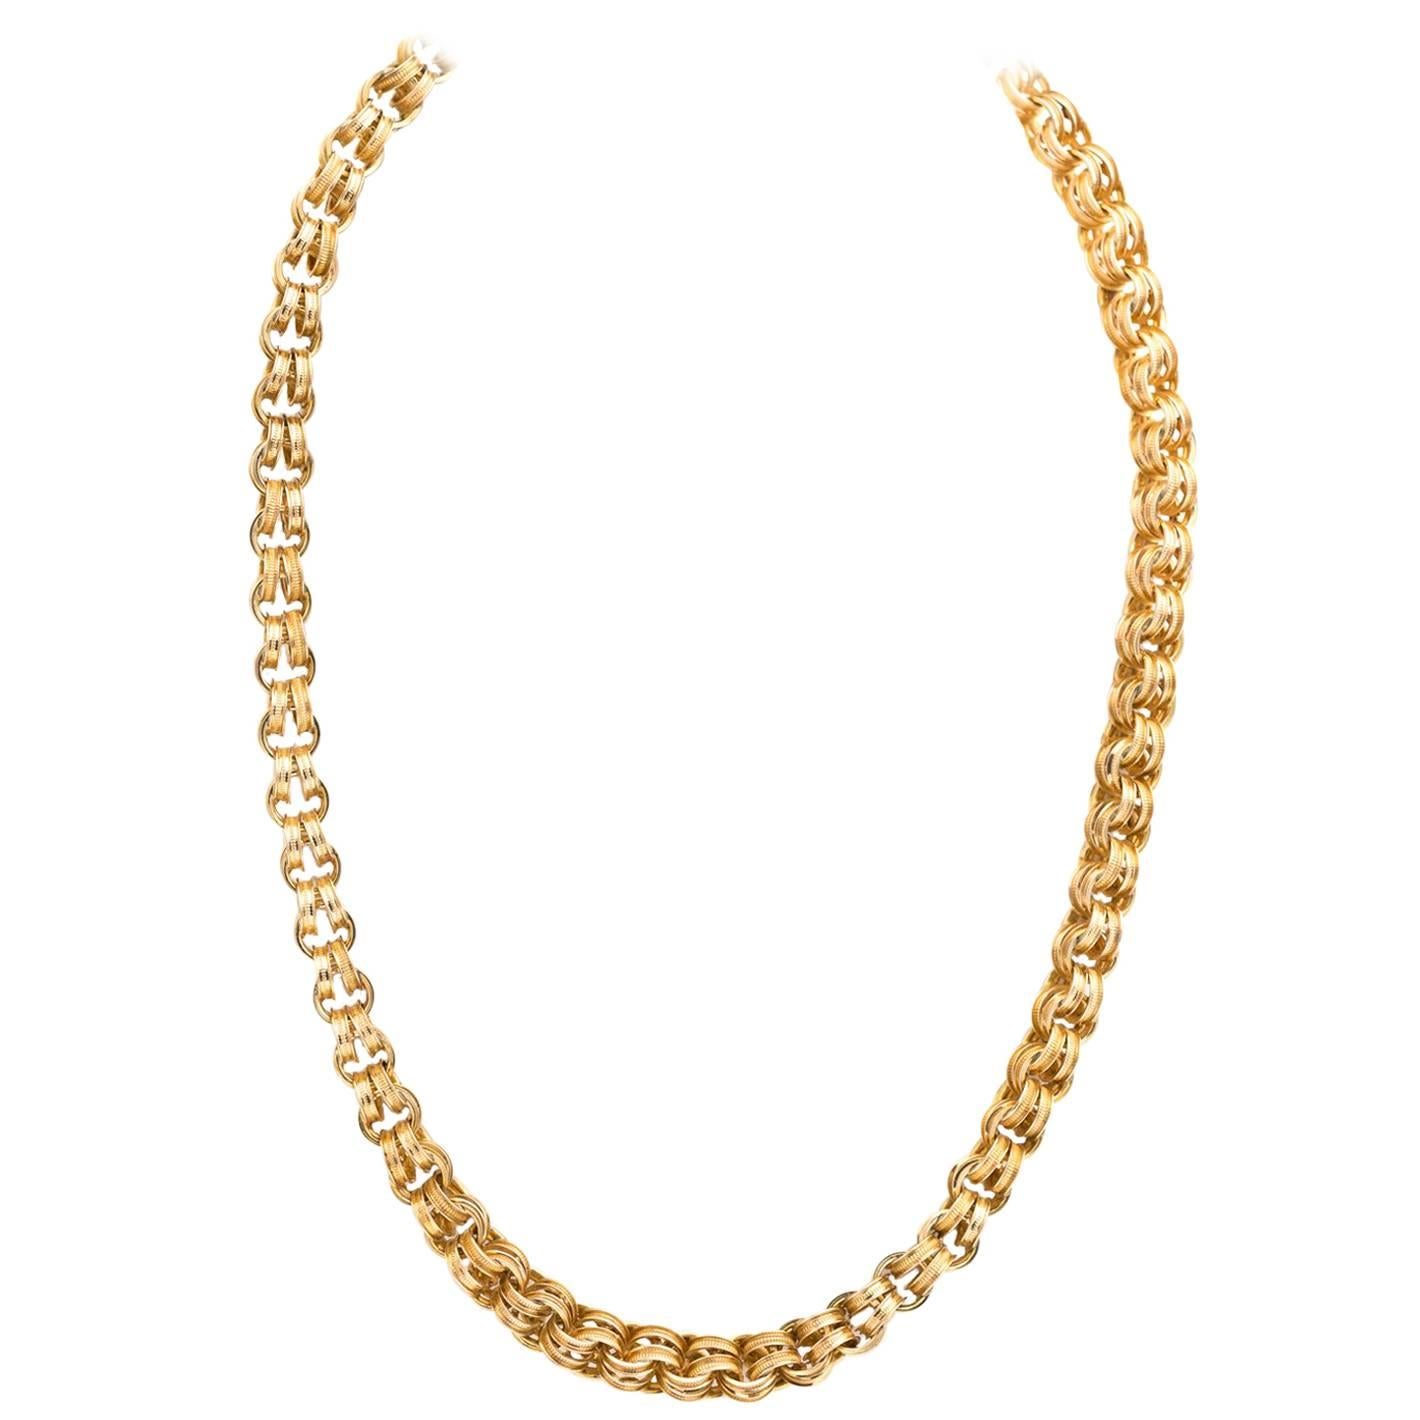 Antique Gold Chain Textured Double Loop Necklace 